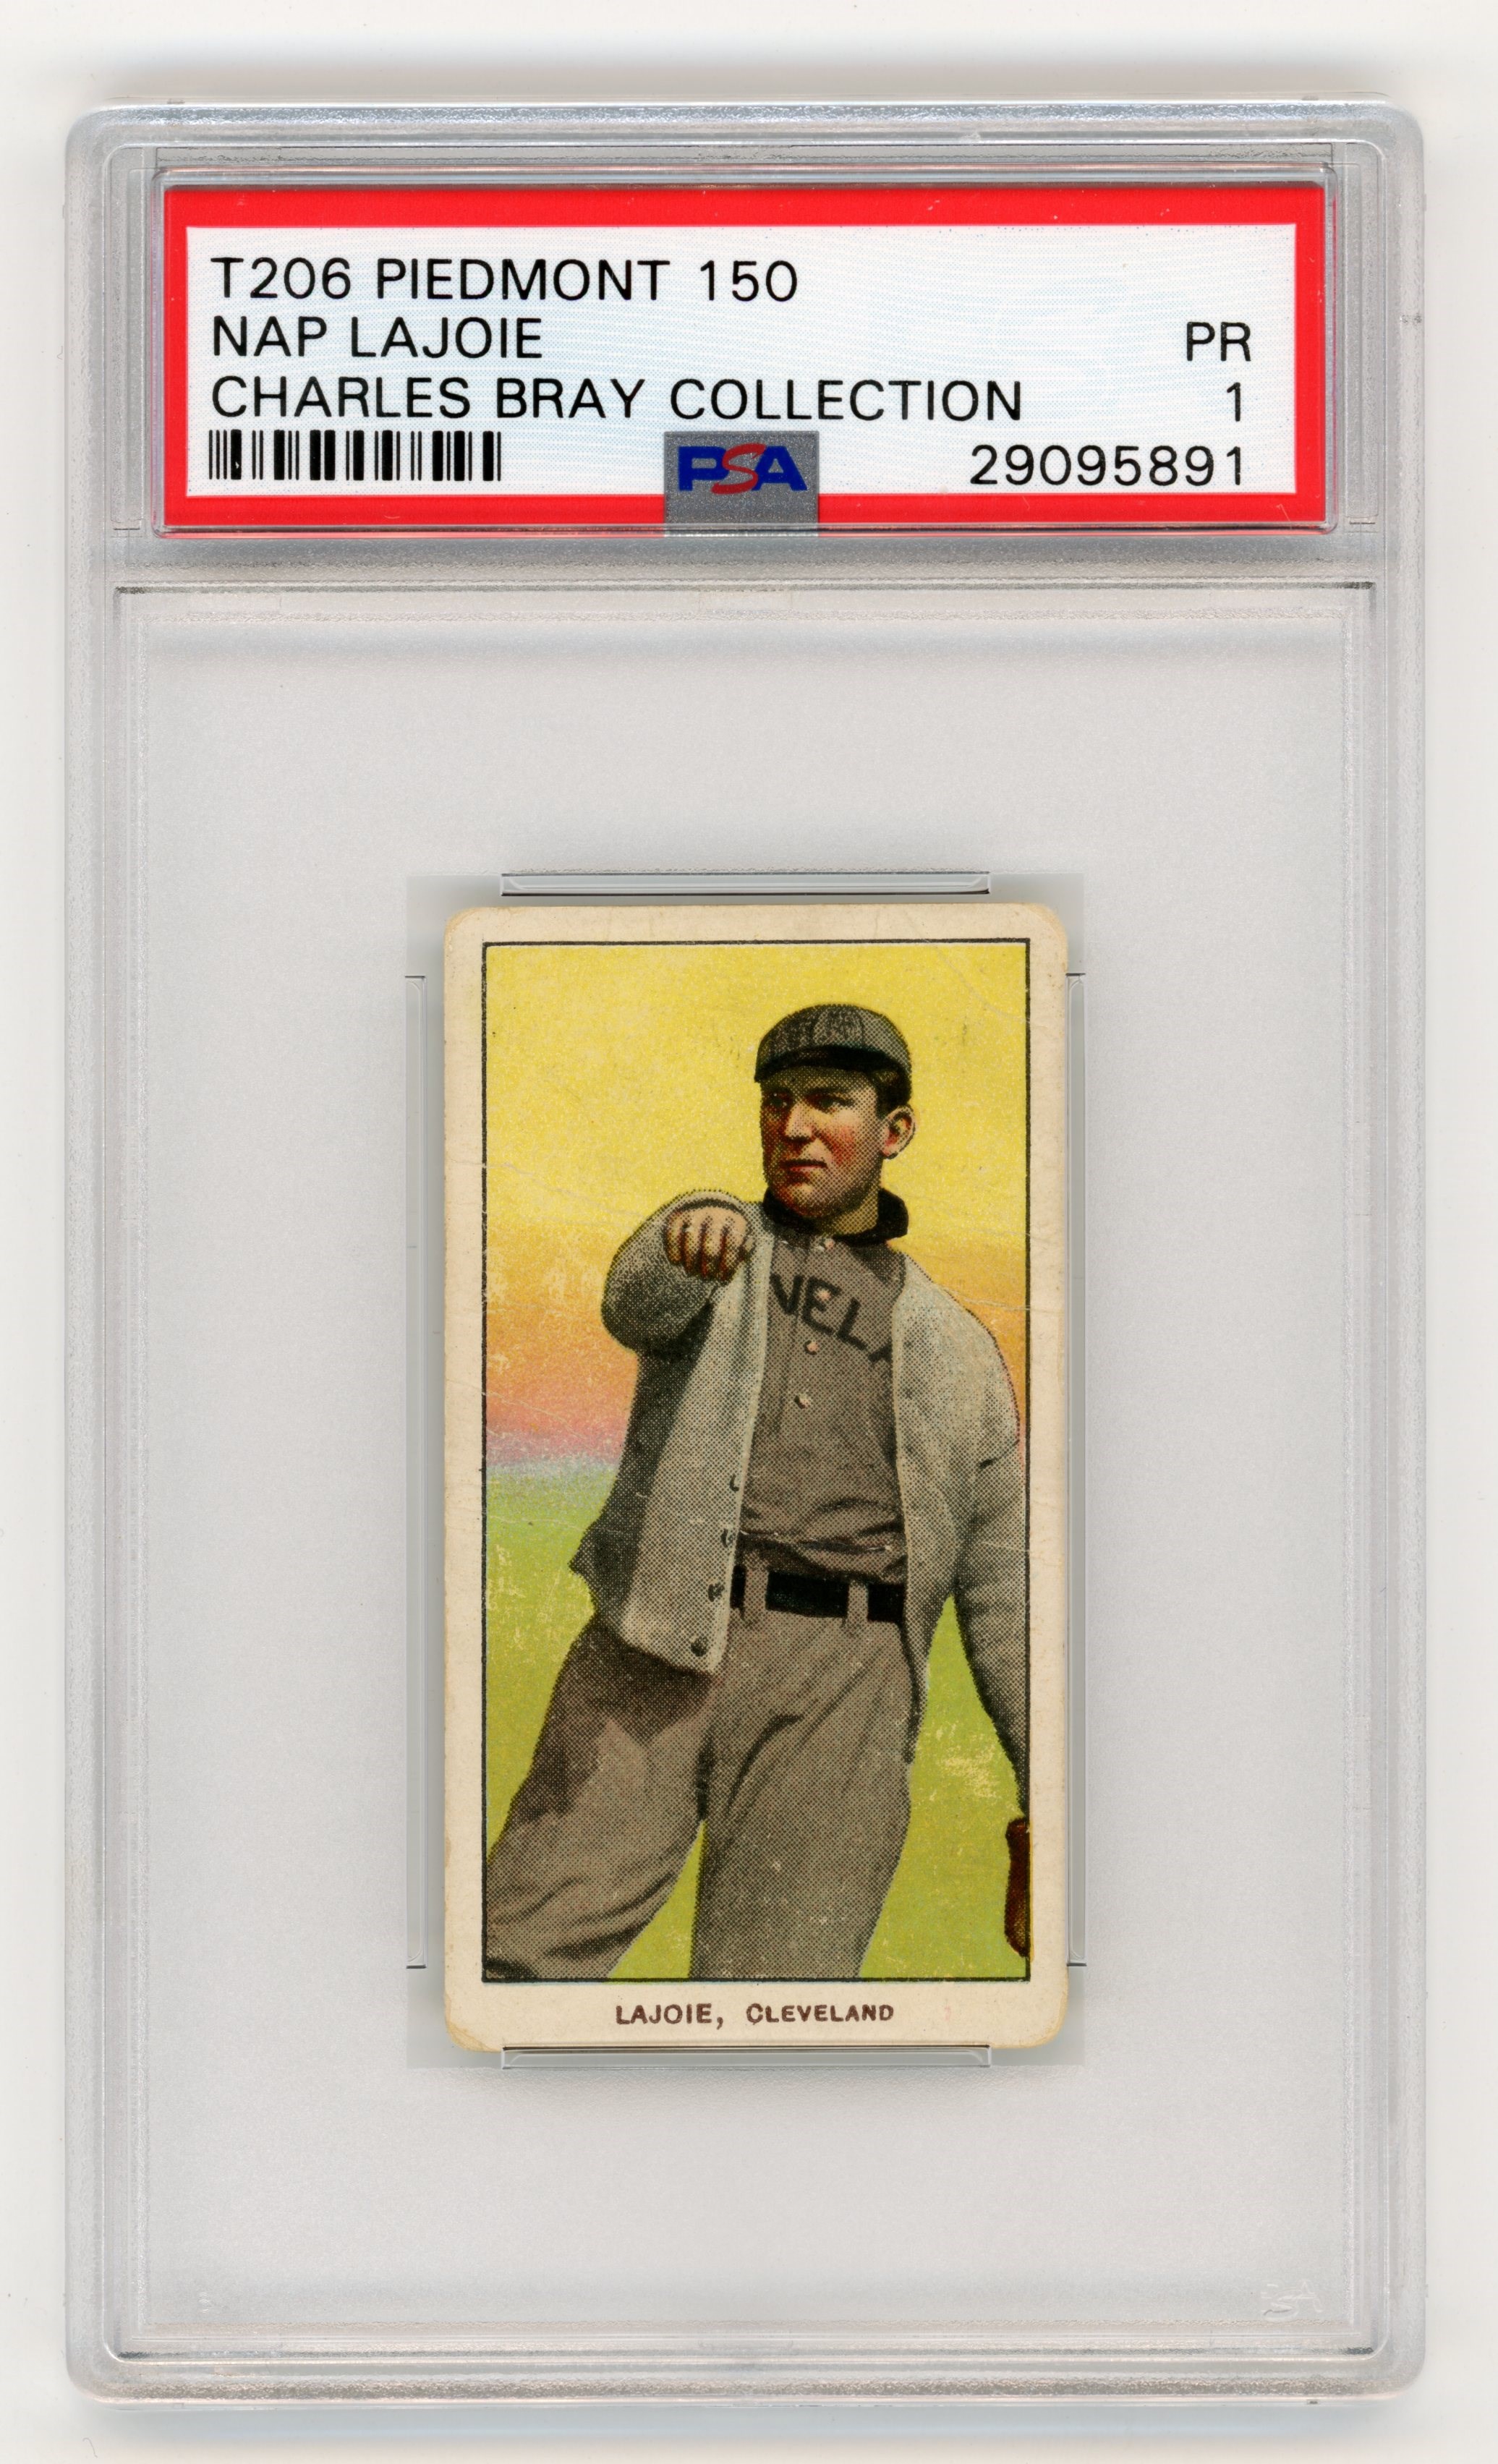 T206 Piedmont 150 Nap Lajoie PSA 1 From Charles Bray Collection